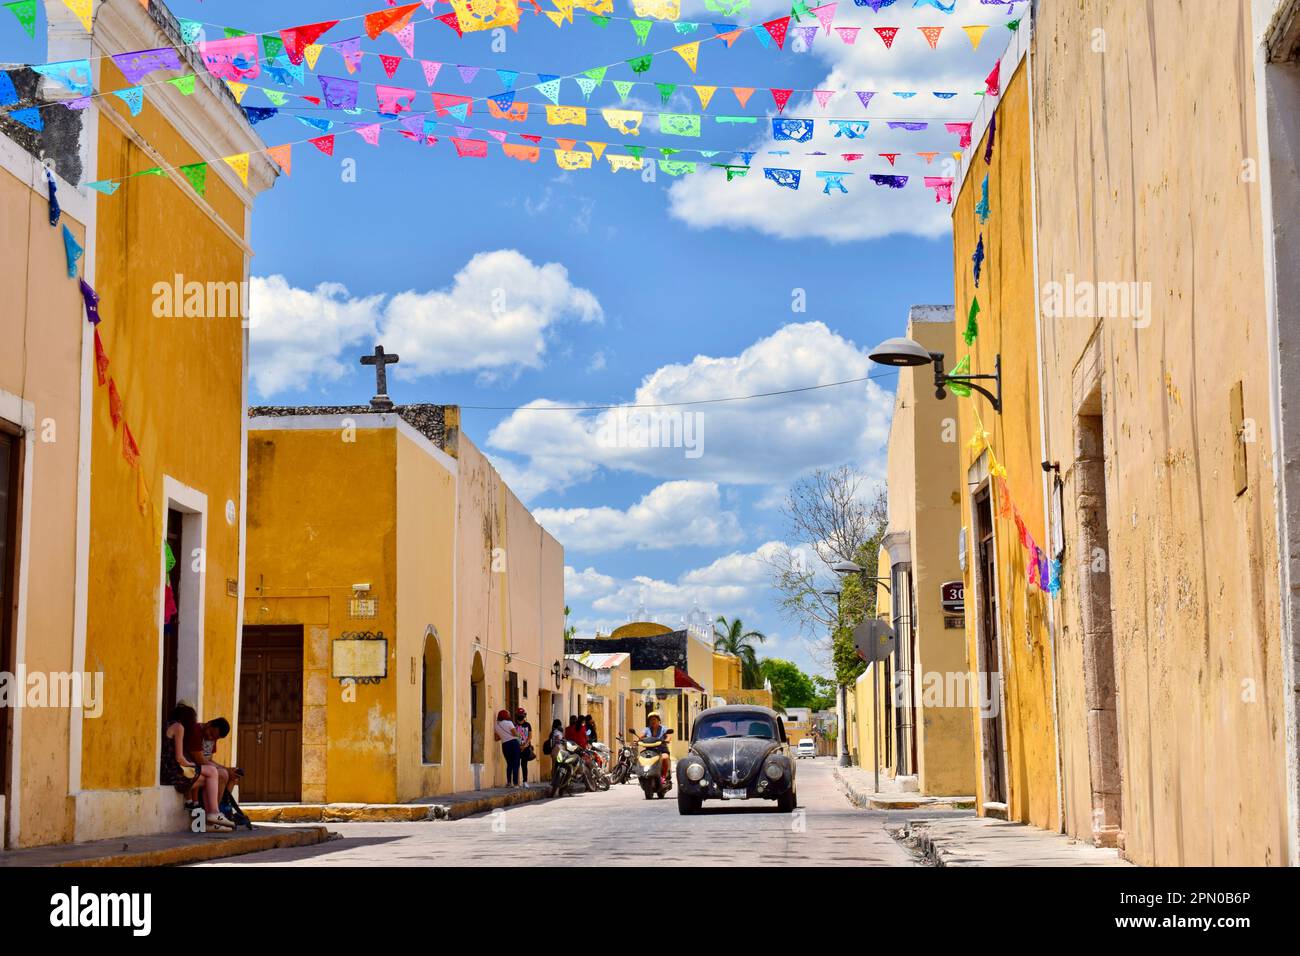 A street scene with people, a scooter, and a Volkswagen beetle in the picturesque town of Izamal, Yucatan, Mexico. Stock Photo